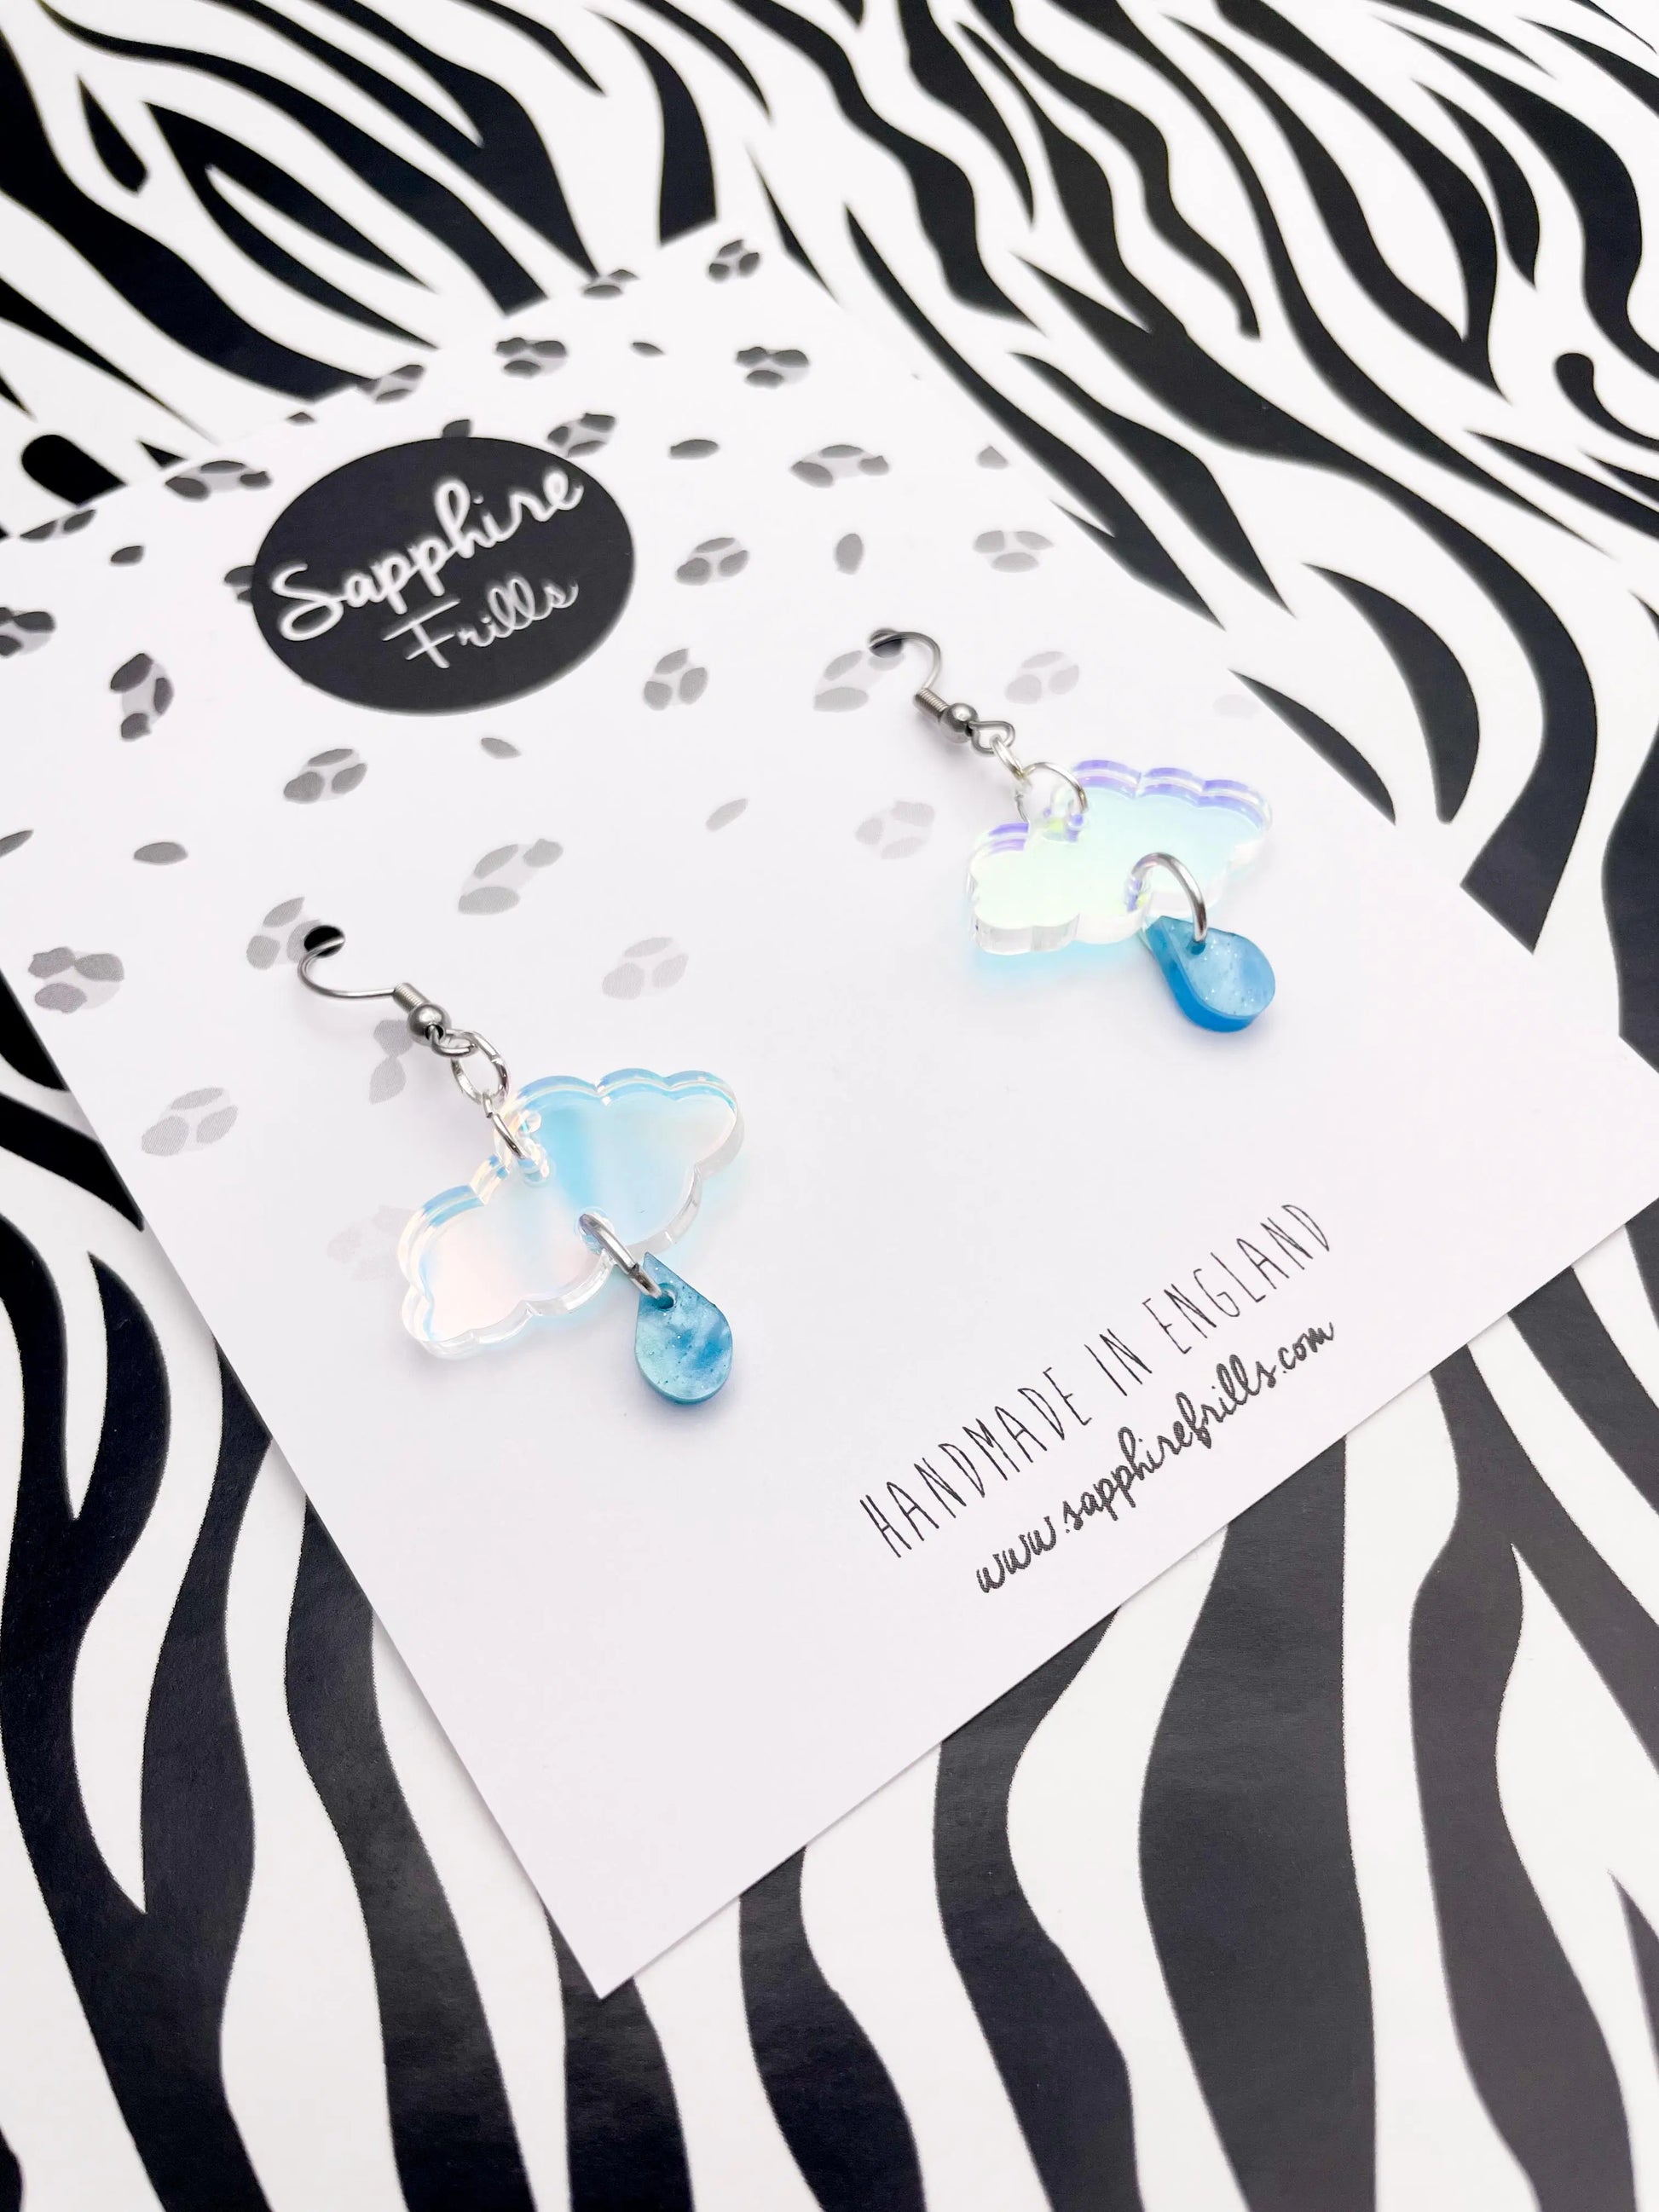 Iridescent Blue and Baby Blue Marble April Showers Small Cloud Dangle Earrings from Sapphire Frills